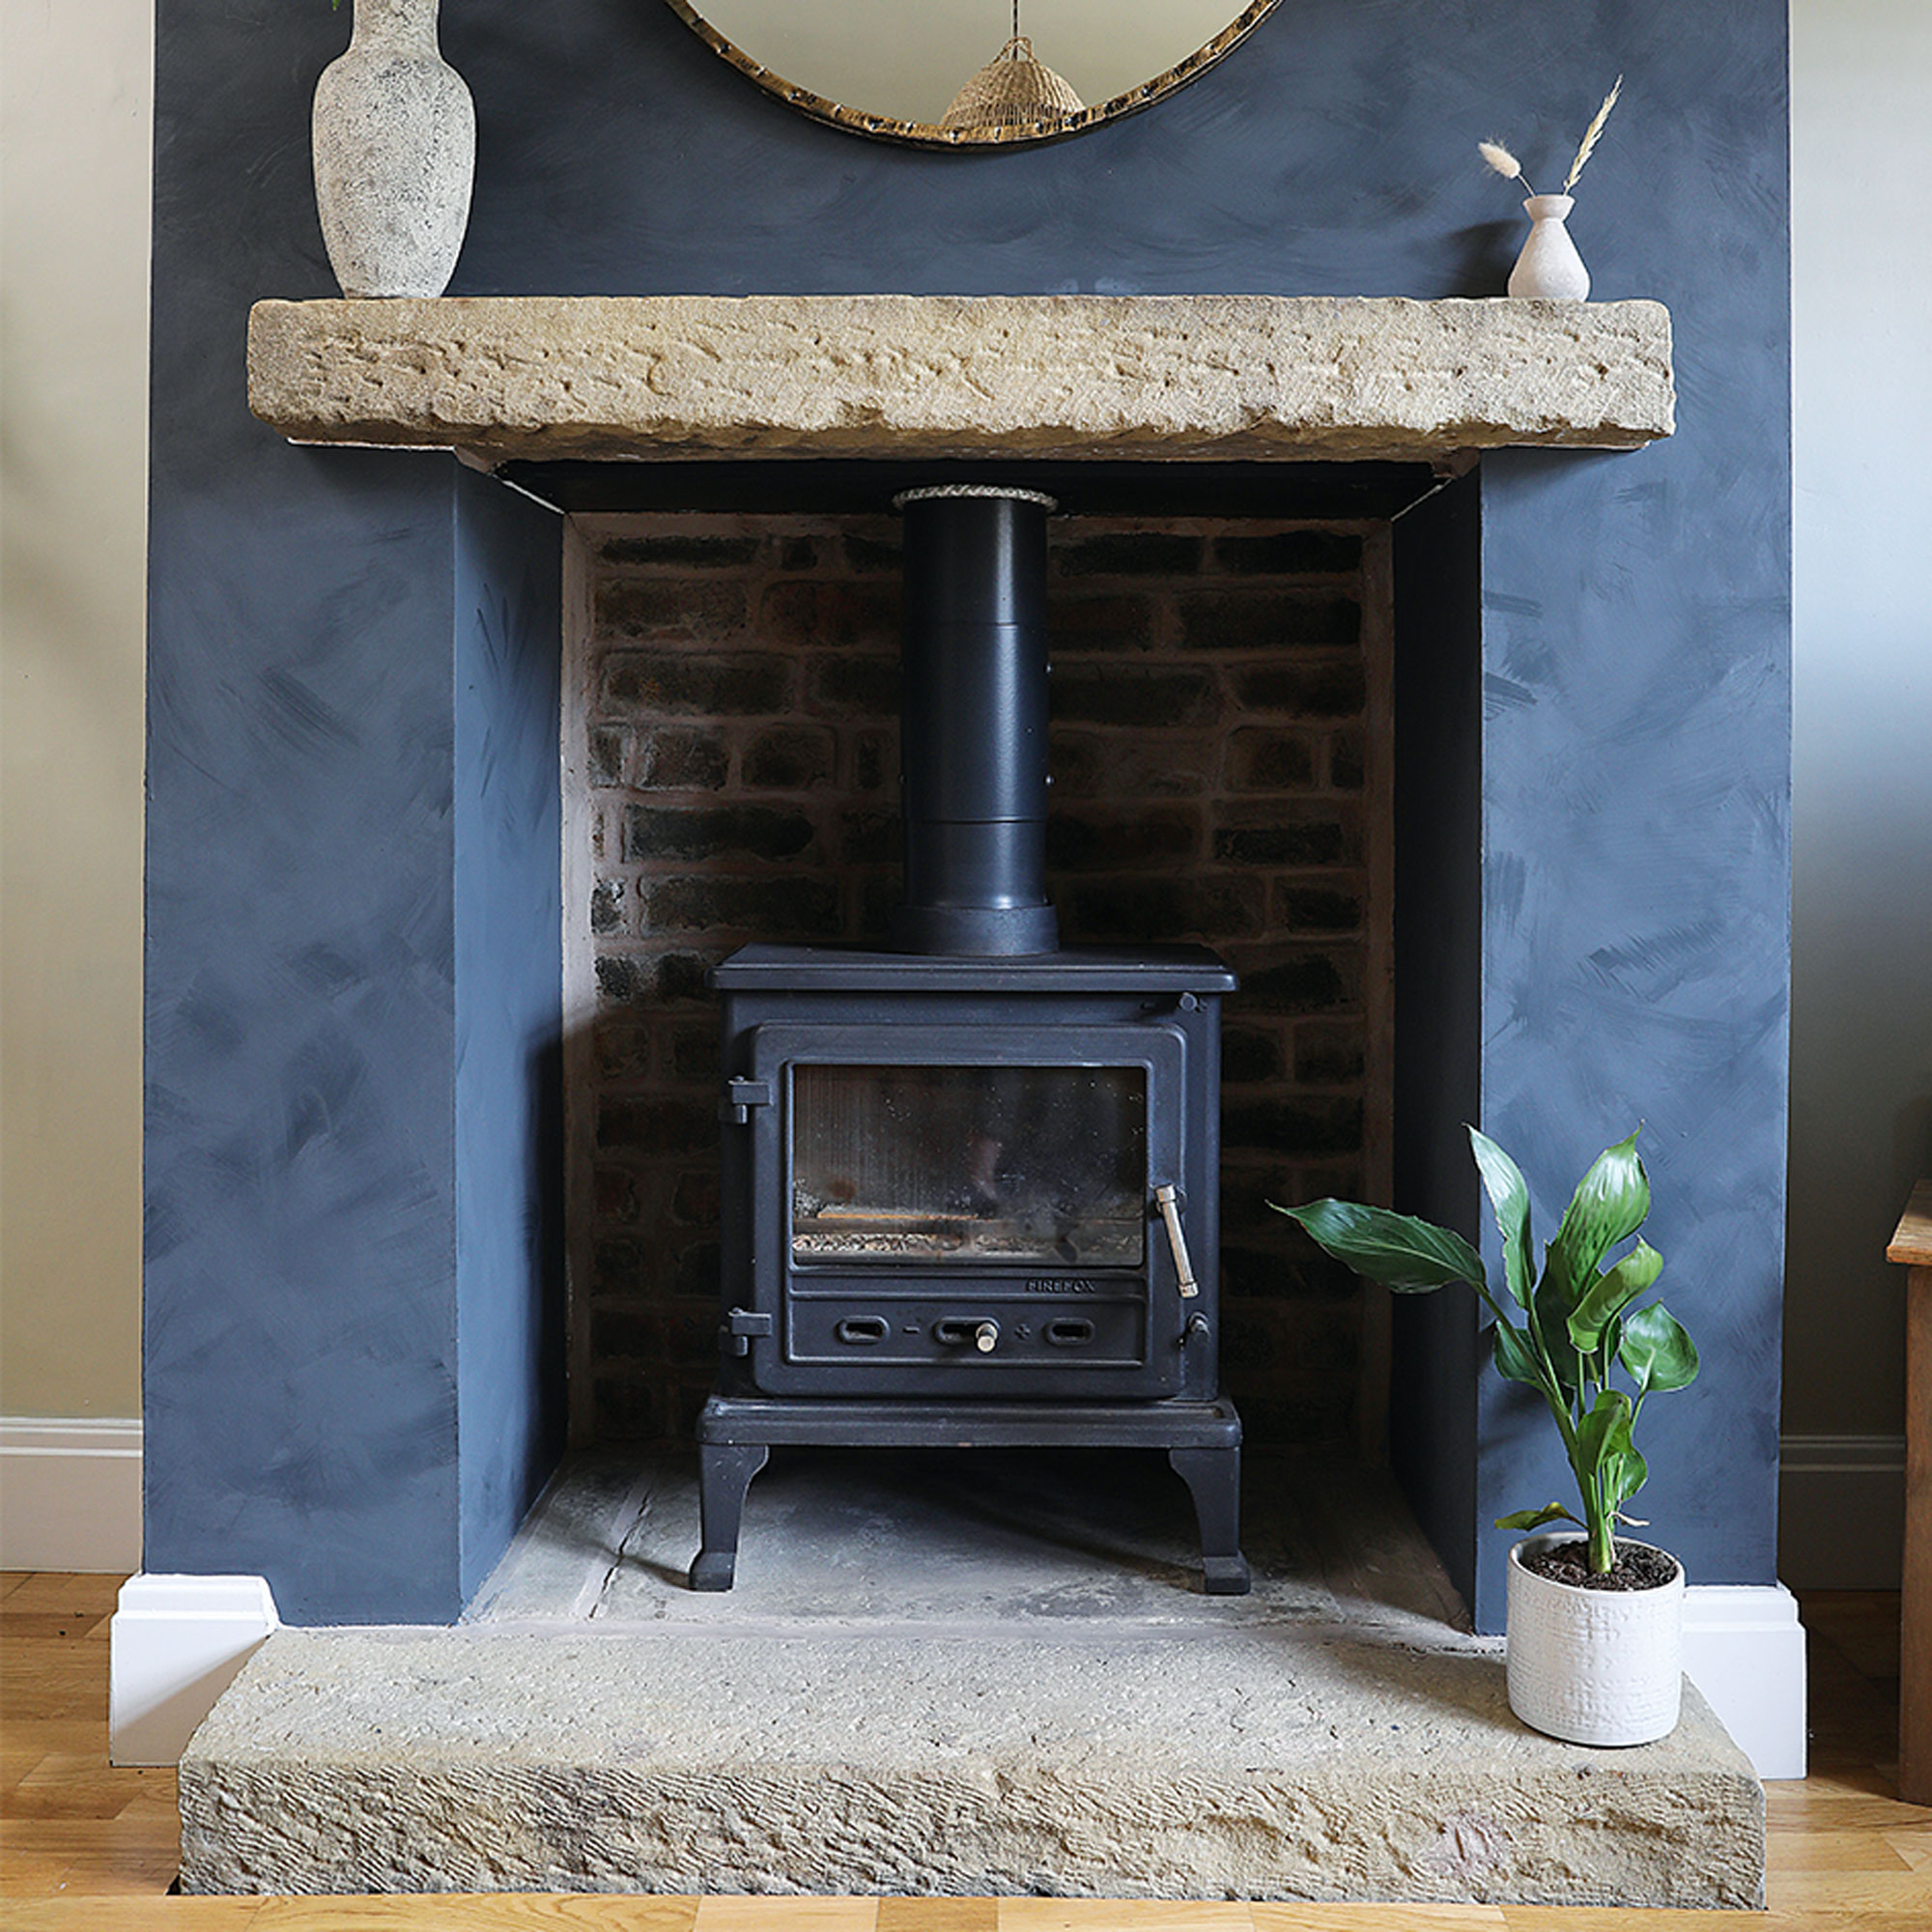 fireplace with woodburner and stone hearth